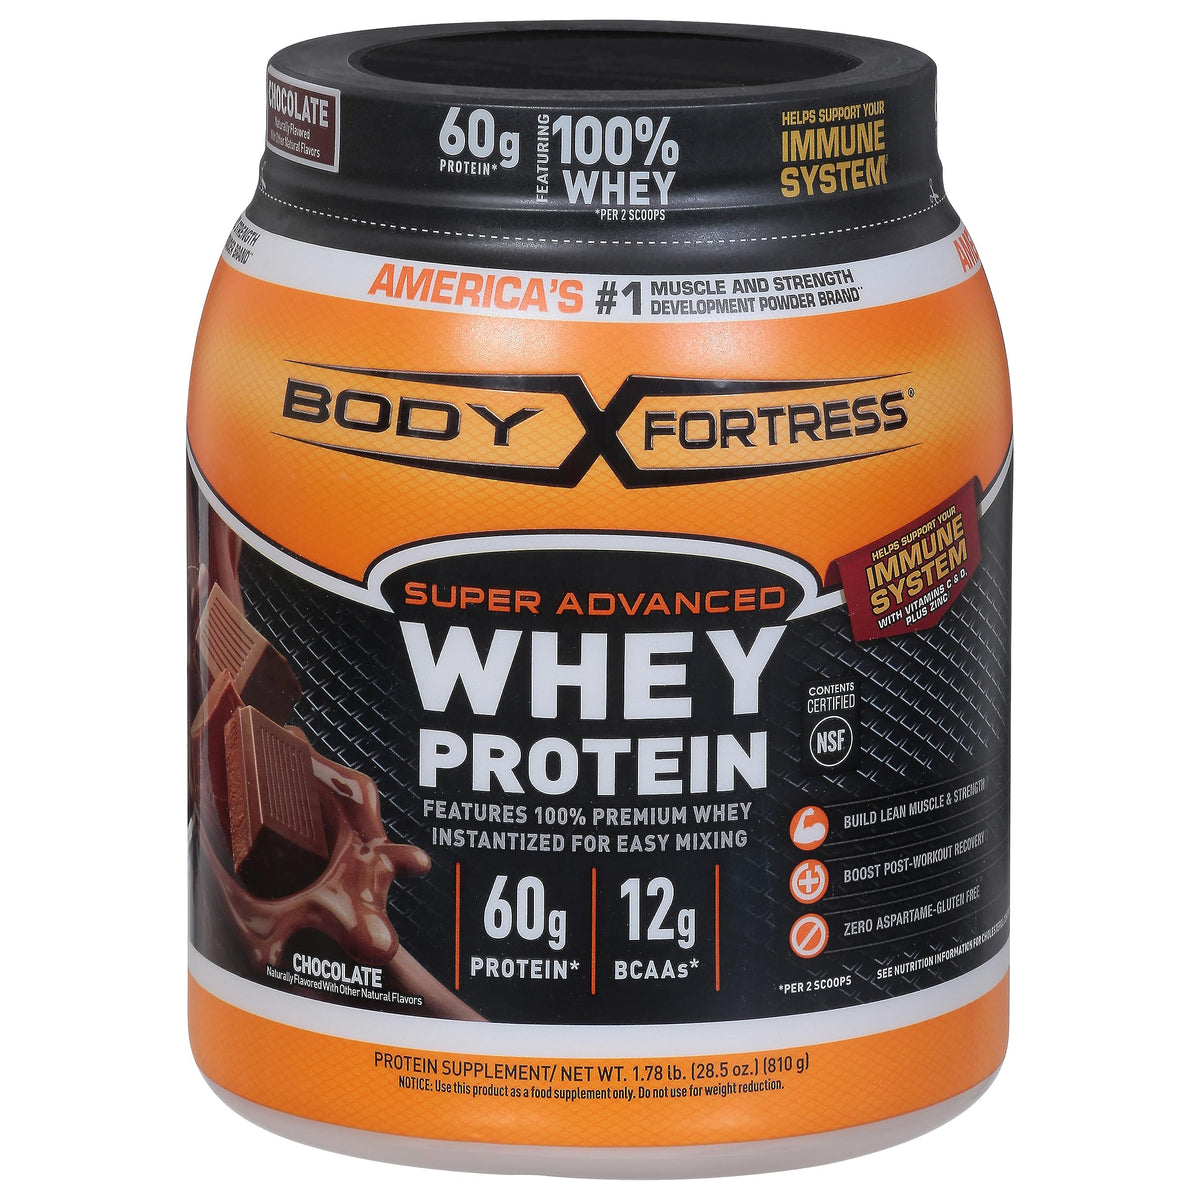 Body Fortress Super Advanced Whey Protein Powder, Chocolate, Immune Support (1), Vitamins C & D Plus Zinc, 1.78 lbs (Packaging May Vary)